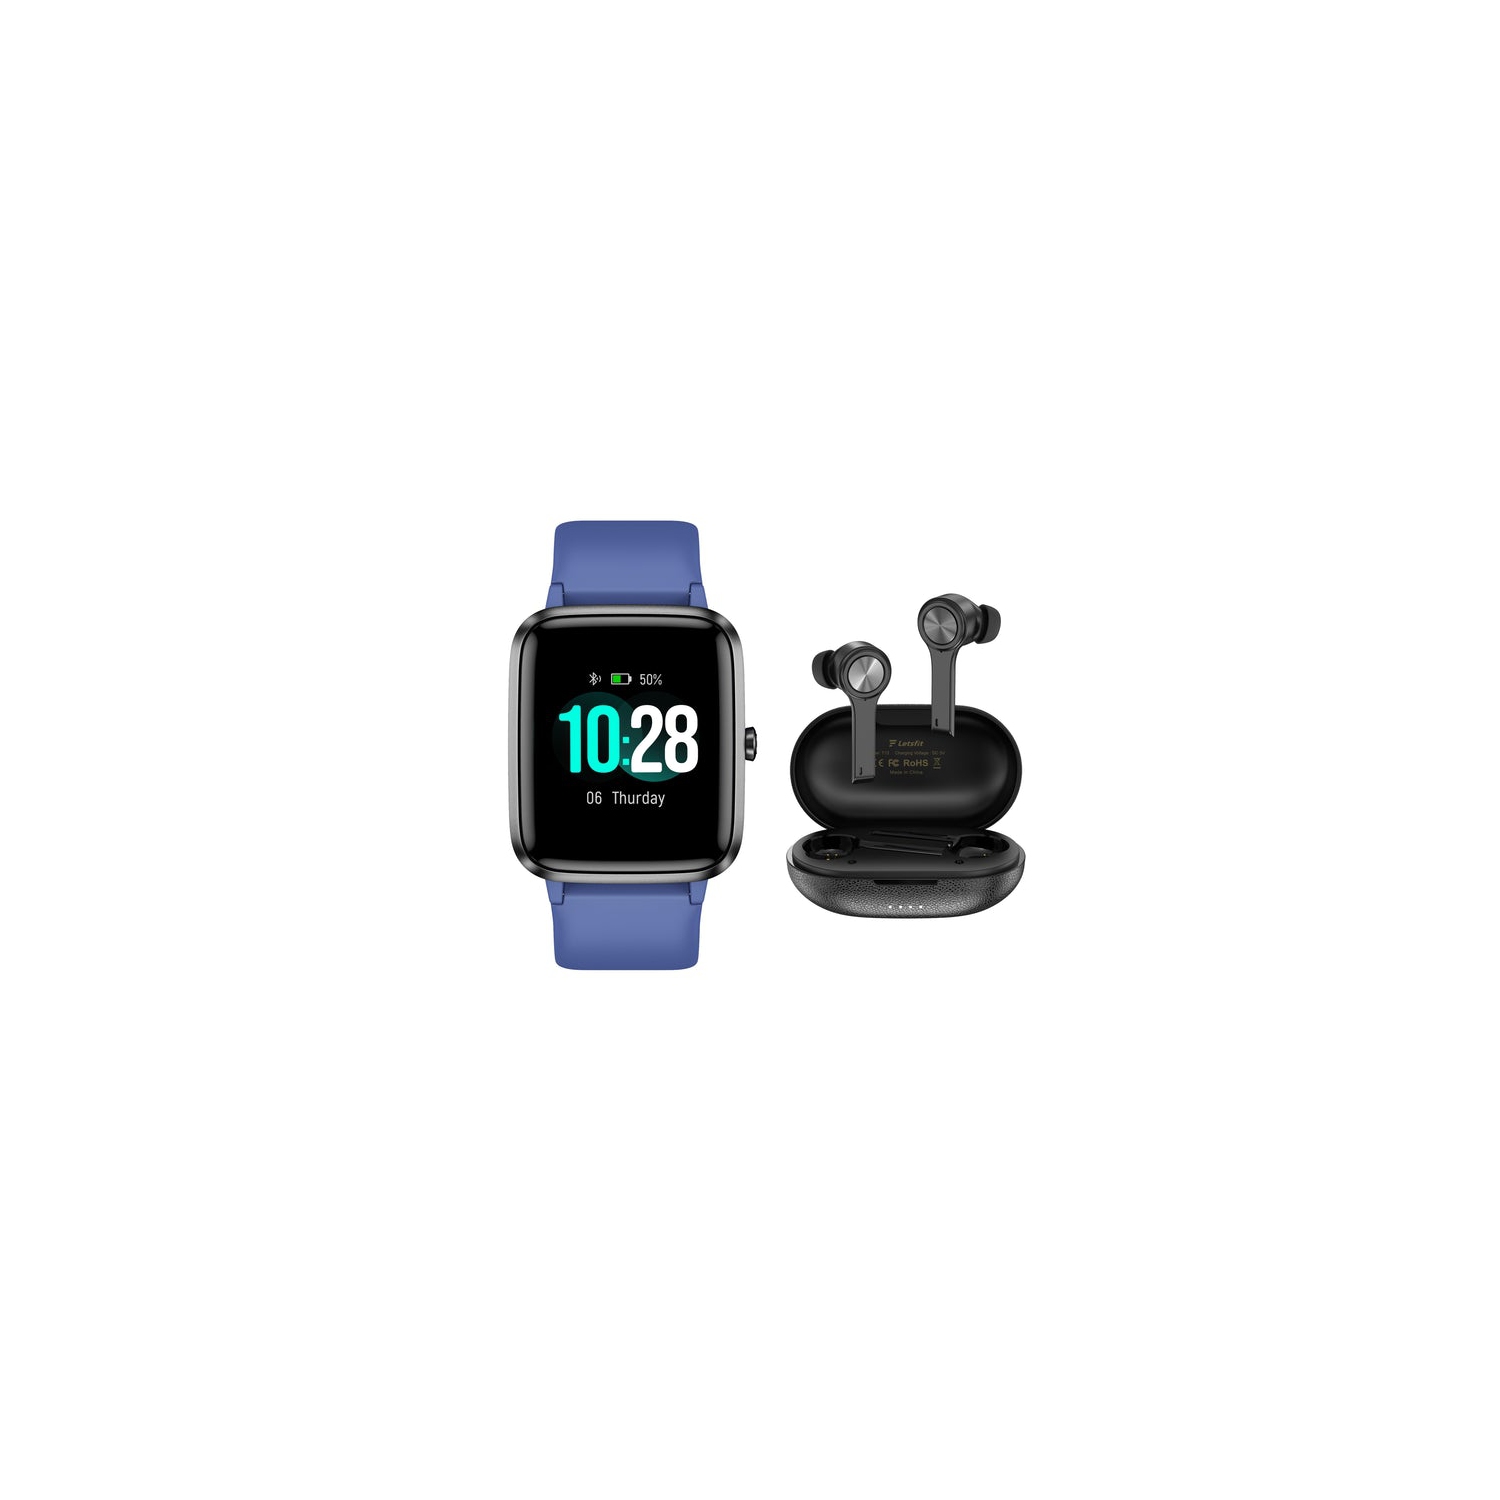 Letscom Bundle 205L Smartwatch & T13 True Wireless Earbuds with Charging Case and Microphone by Letsfit - Blue